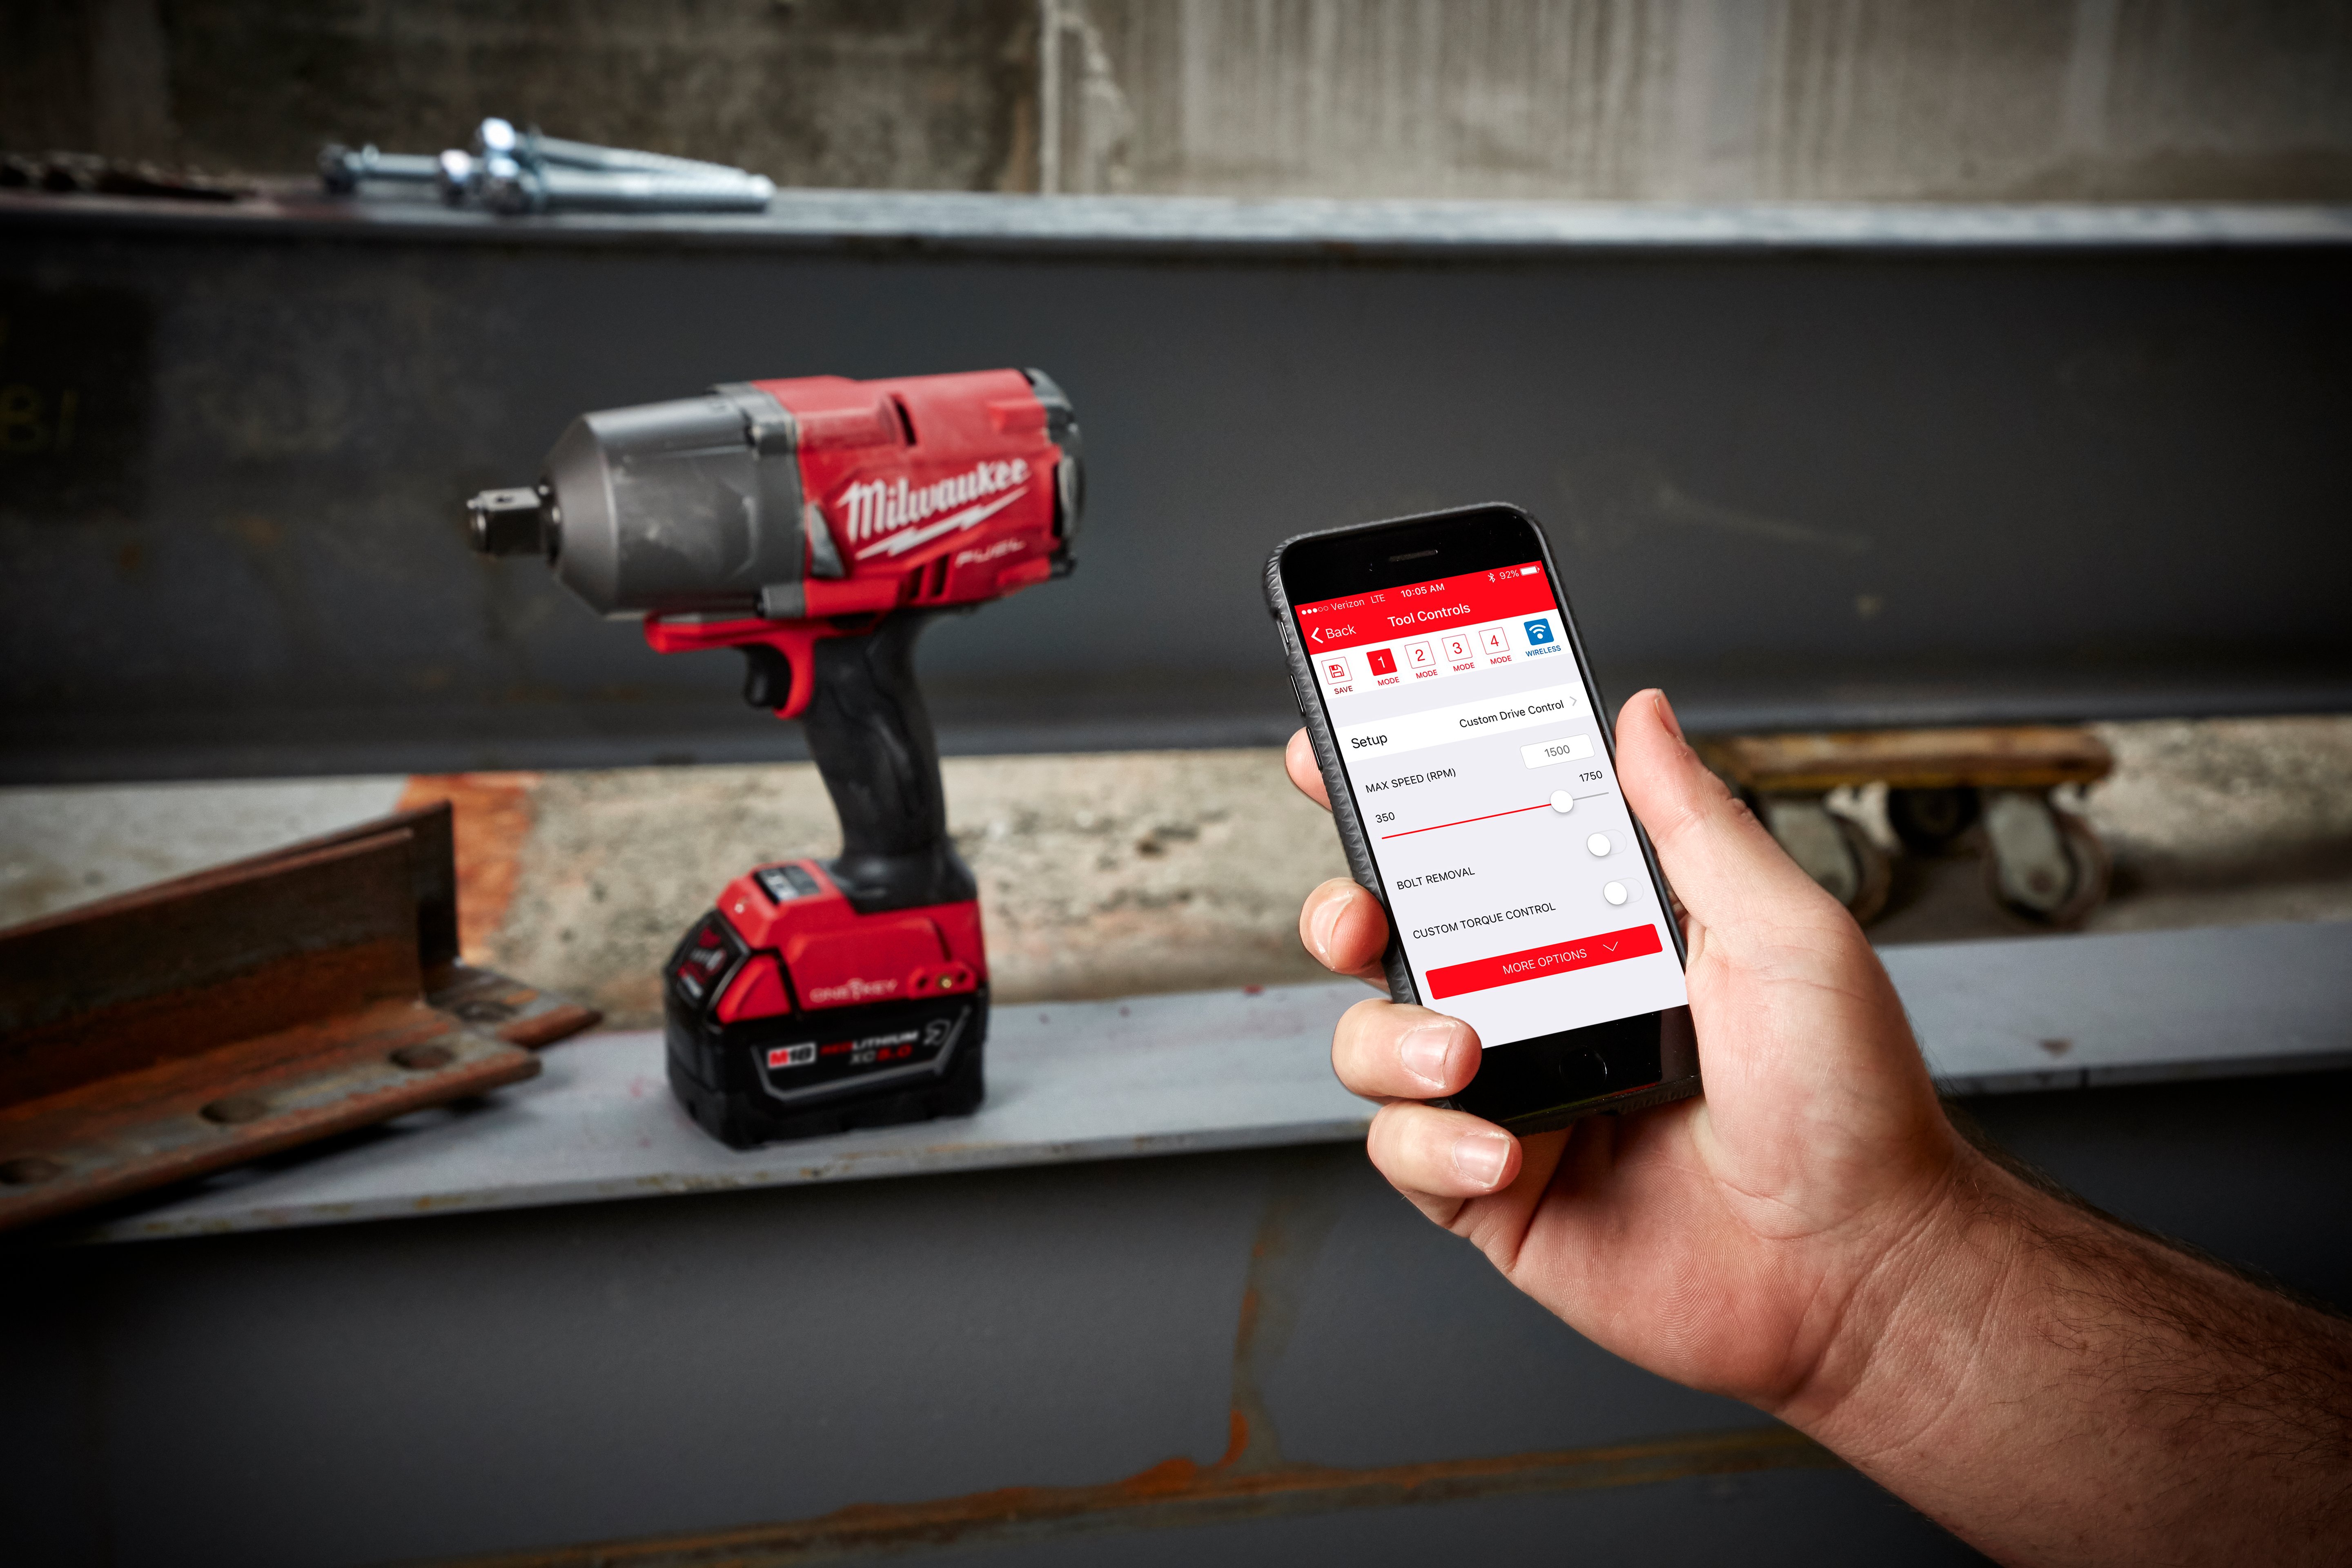 End user with One-Key app on smart phone adjusting max speed on impact wrench